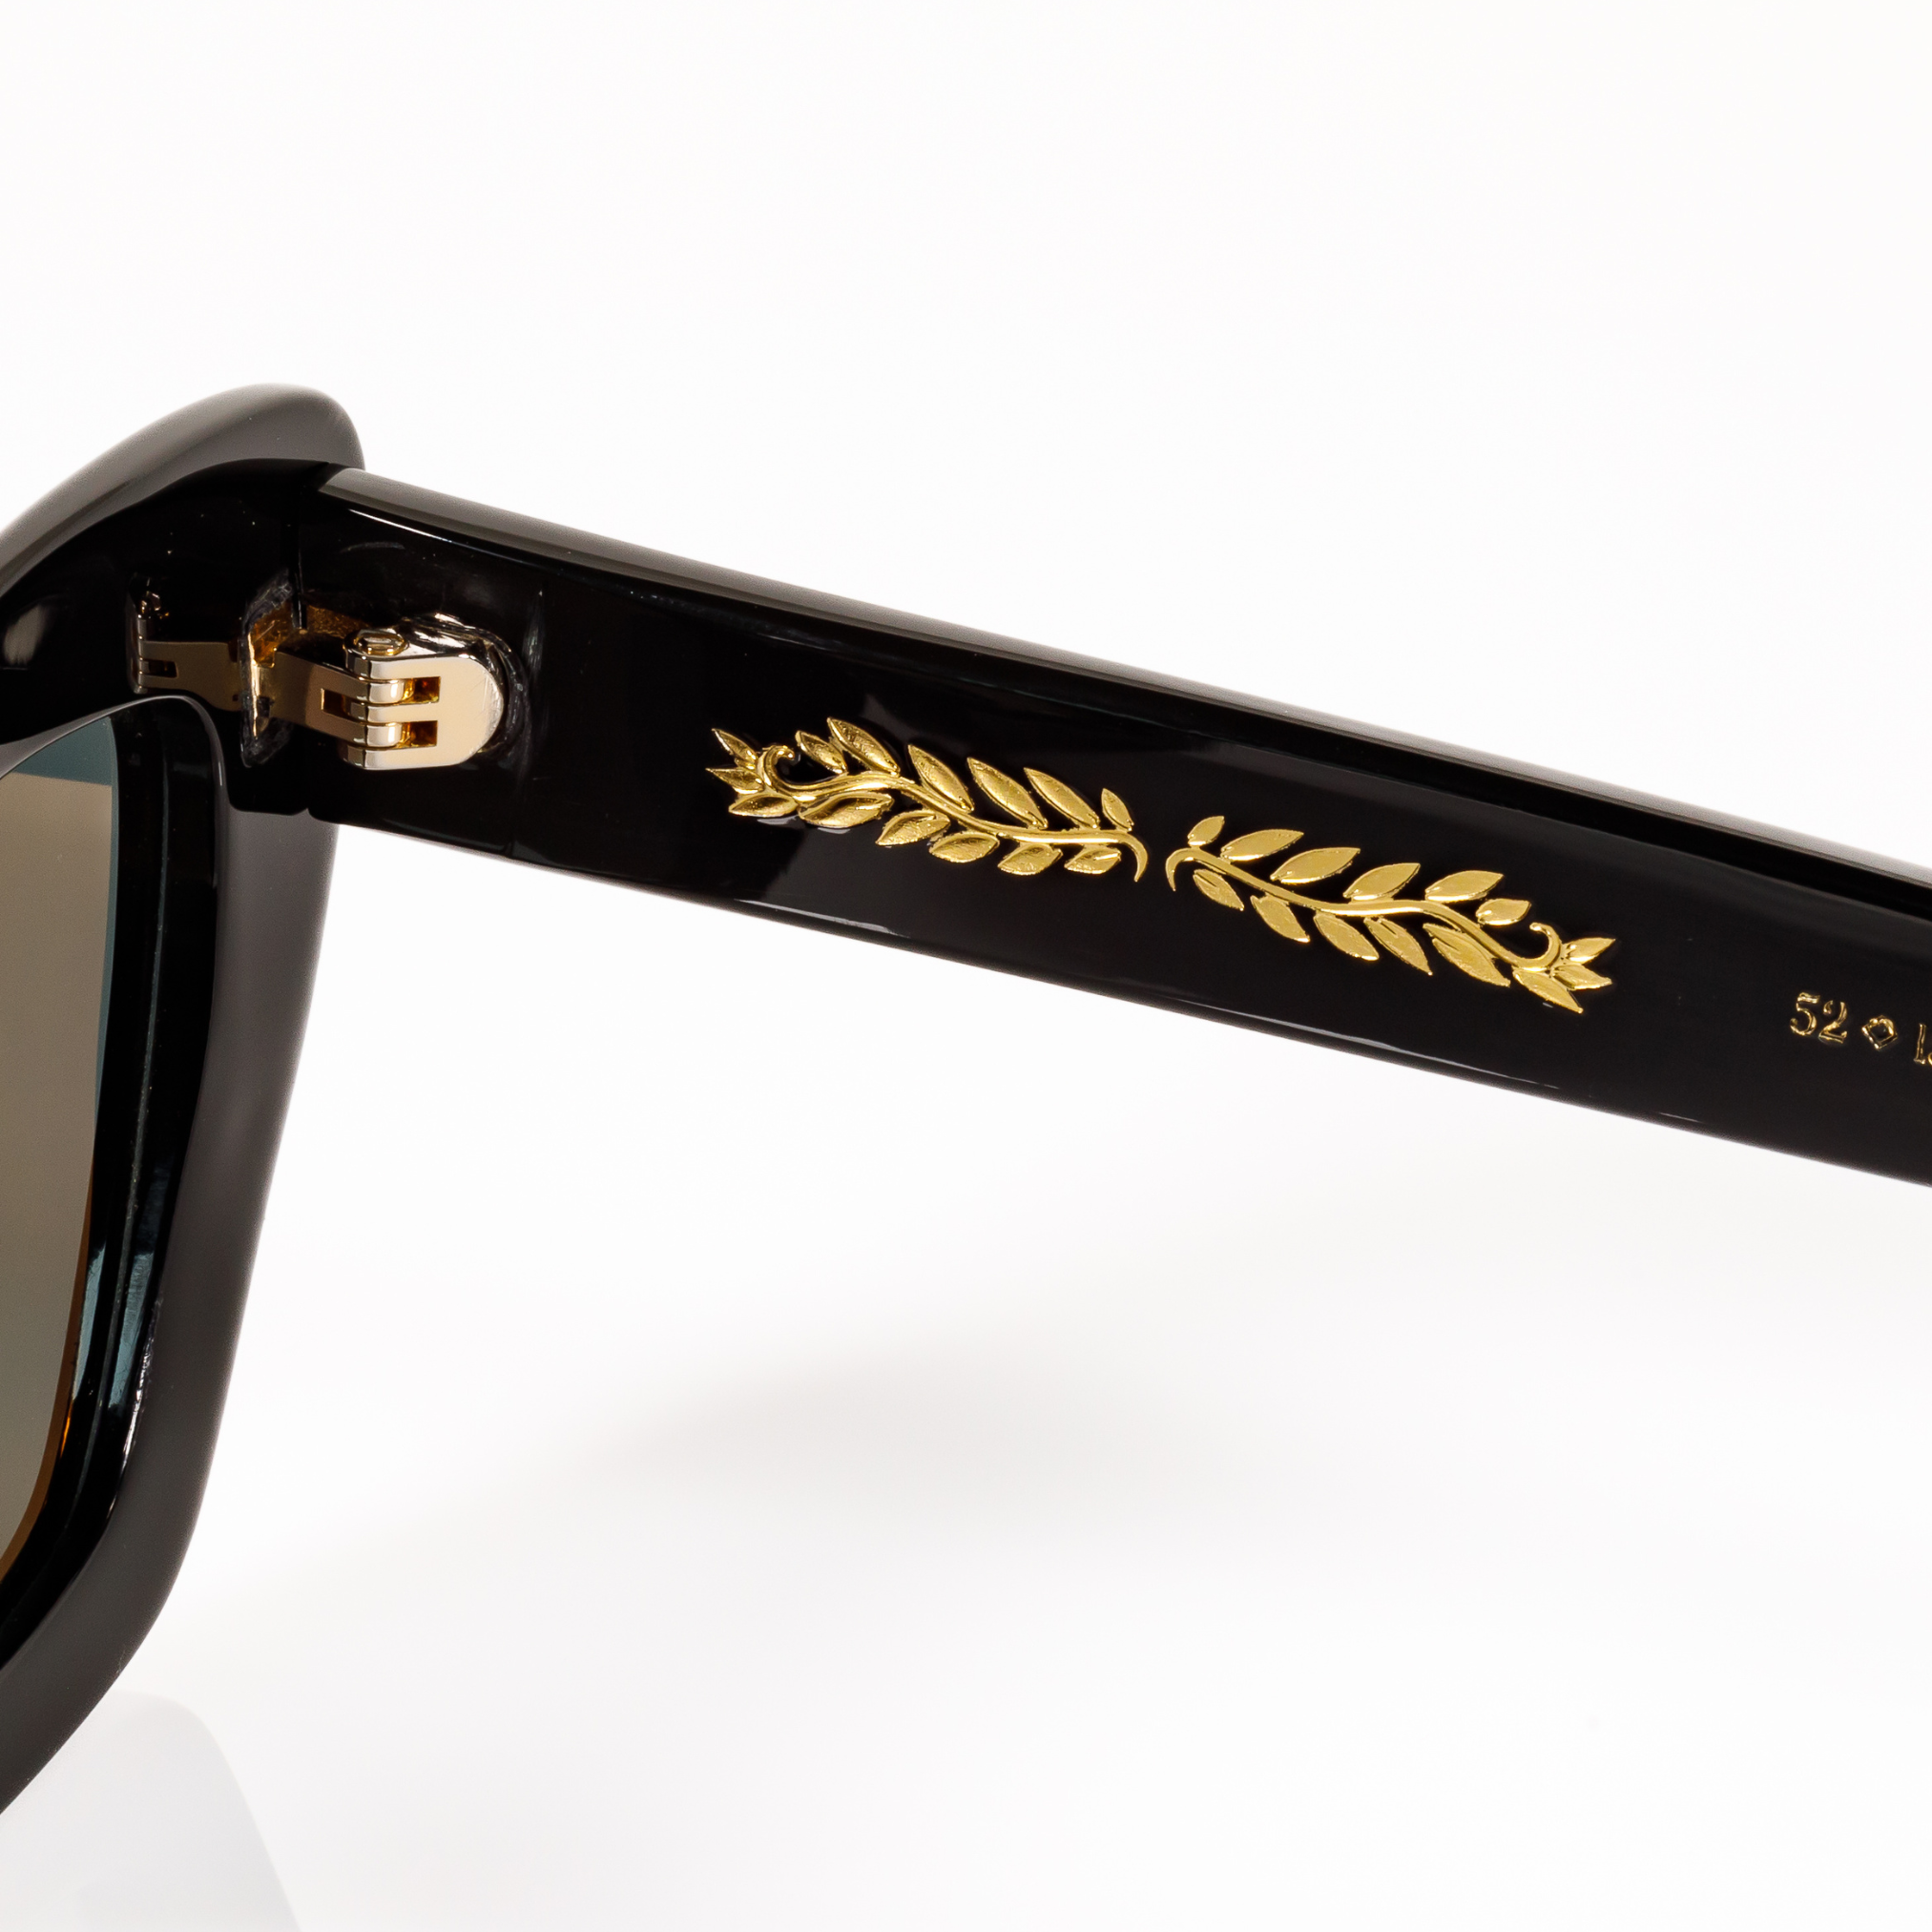 Gold laurel leaf hot stamping detail on the internal temple of Memorí black acetate cat eye sunglasses, the best cat eye sunglasses for small faces and petite faces